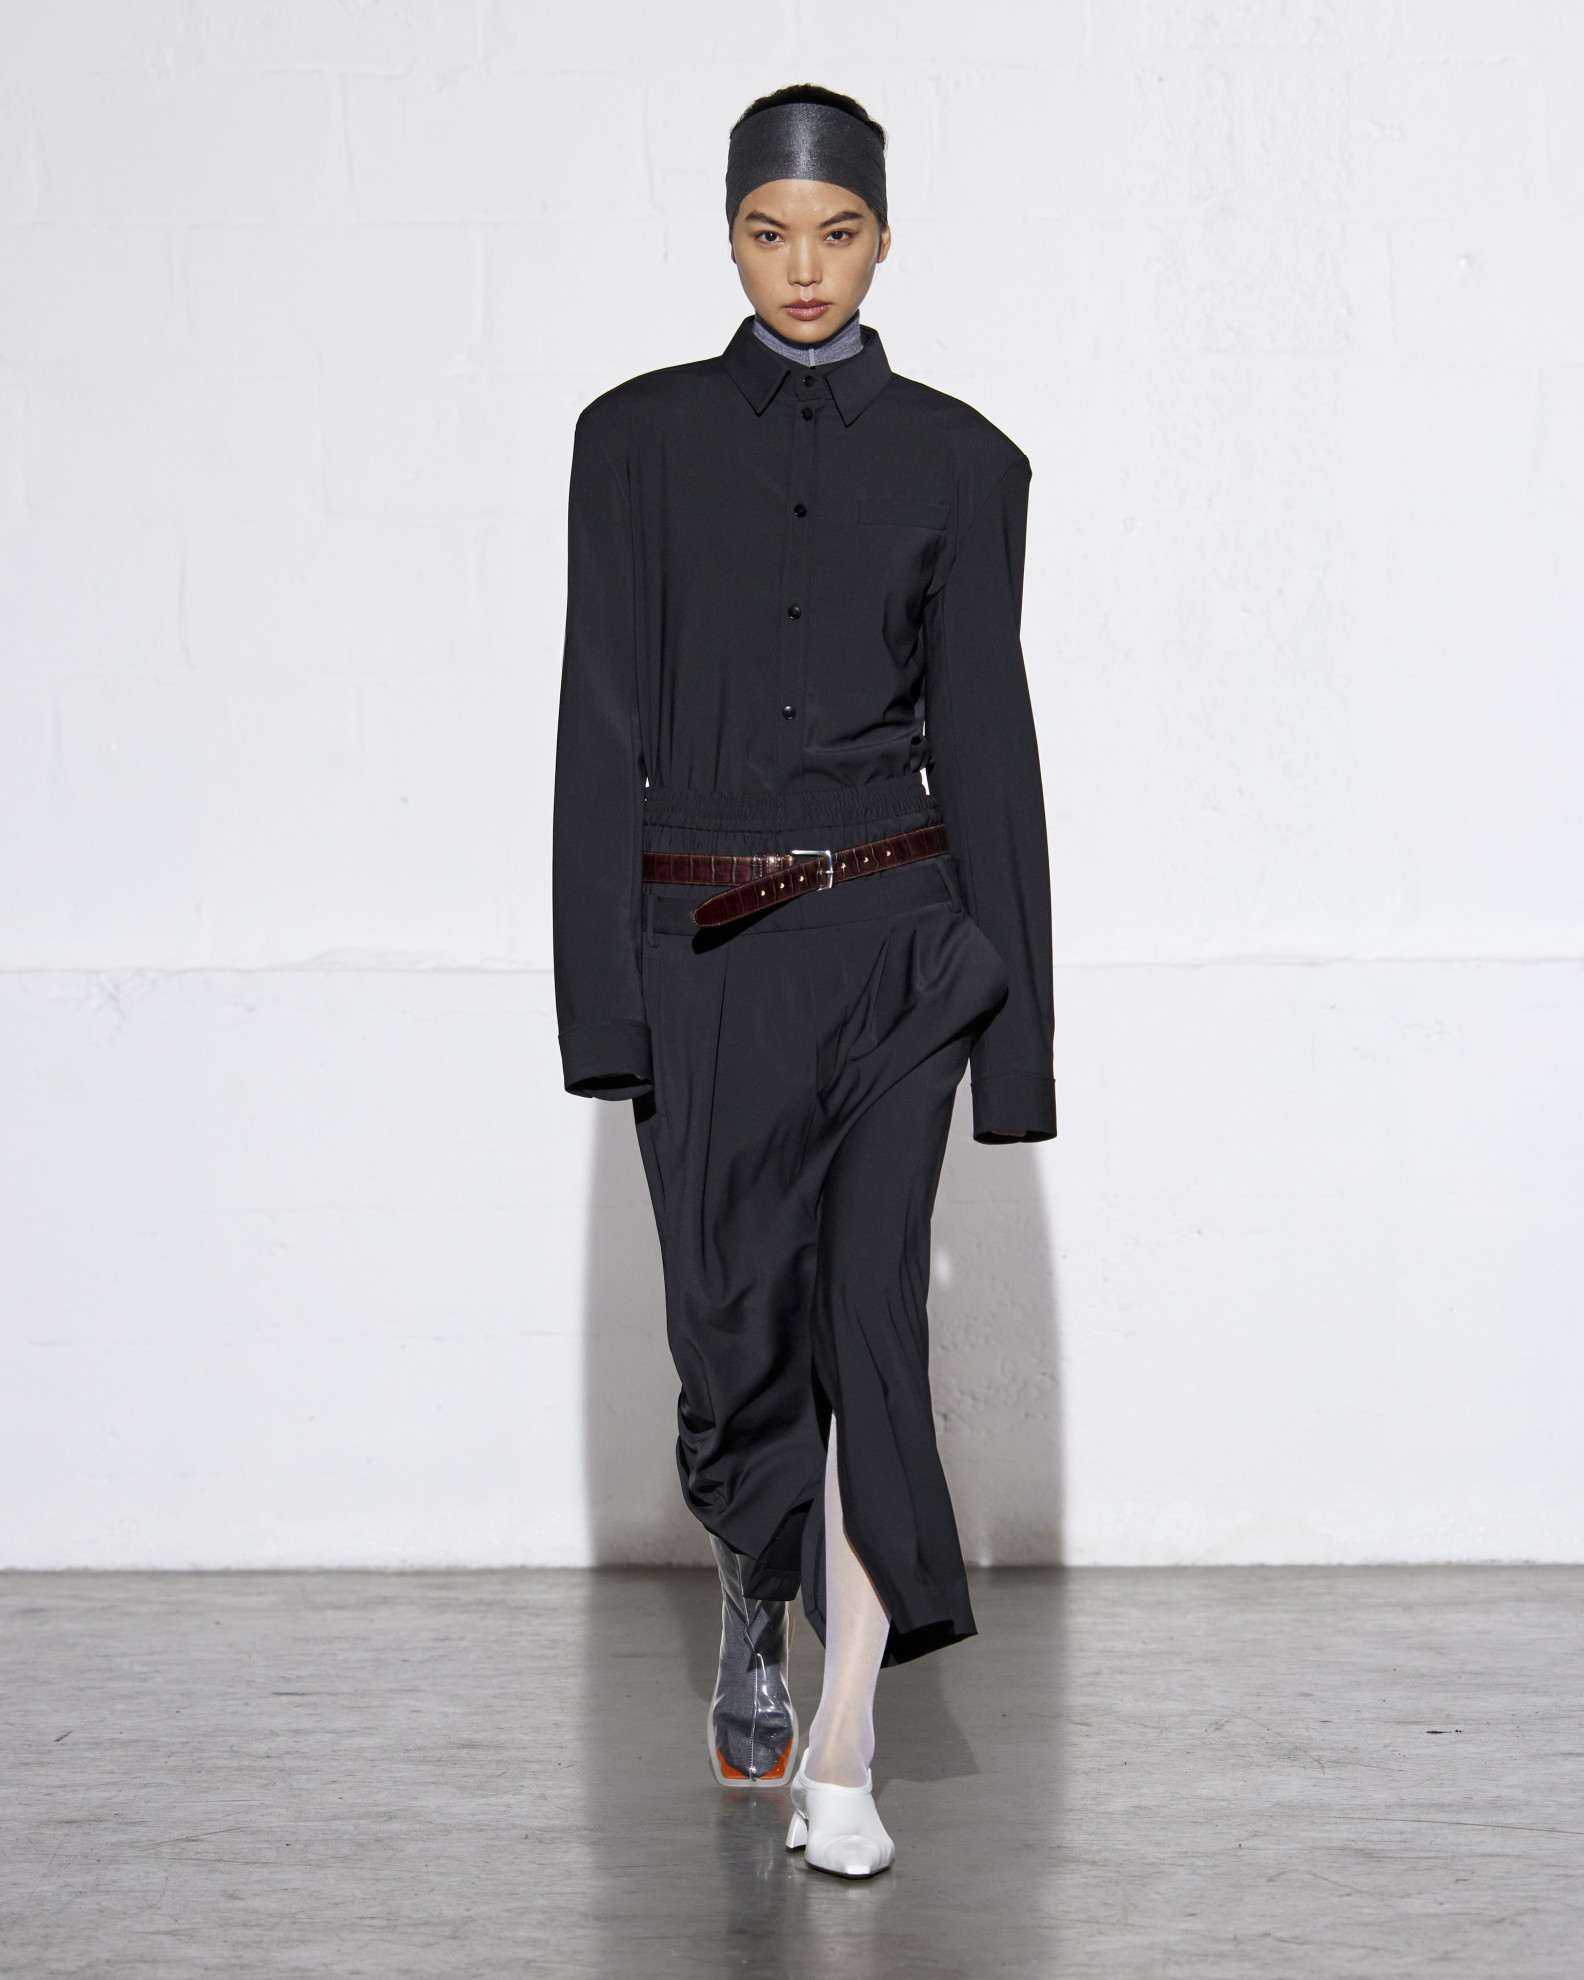 A Tibi model wearing a navy jacket and skirt with white tights at the F/W 24 show